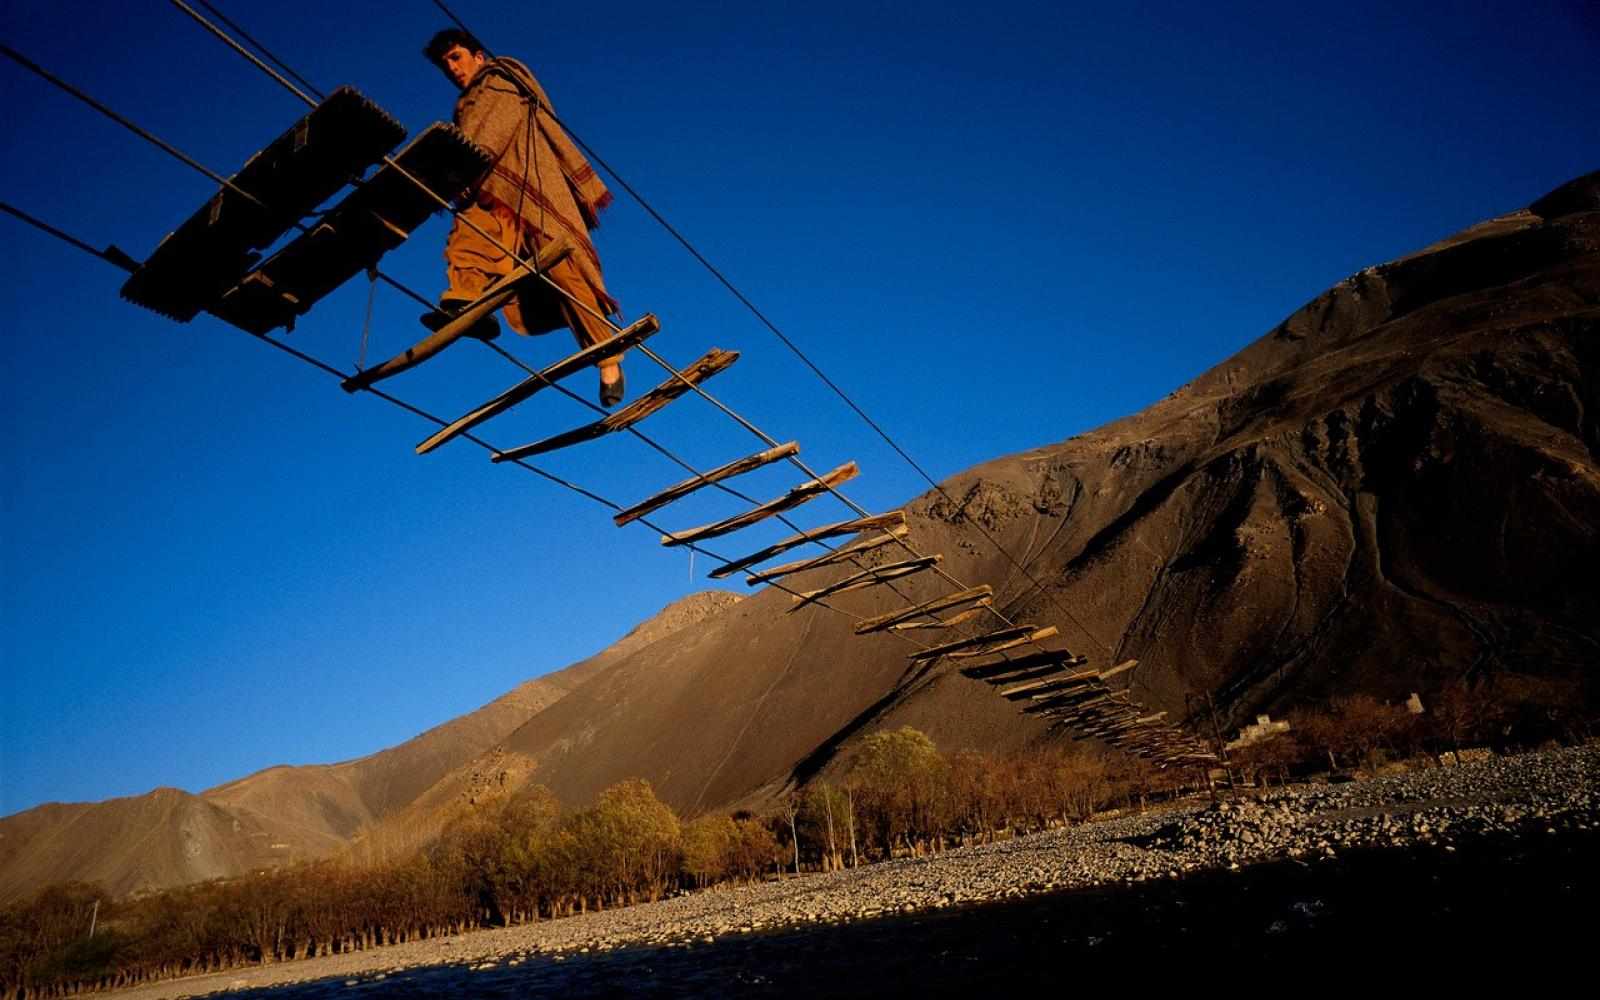 2020 Leading Social Entrepreneurs Front Cover. Depicting a man in the valleys of northeastern Afghanistan crossing a cable bridge with sparsely spaced wood planks above the Pandjchir River, connecting the village of Malespe to a refugee camp. Photographer and Ashoka Fellow, Reza Deghati, captured this shot in 2000.